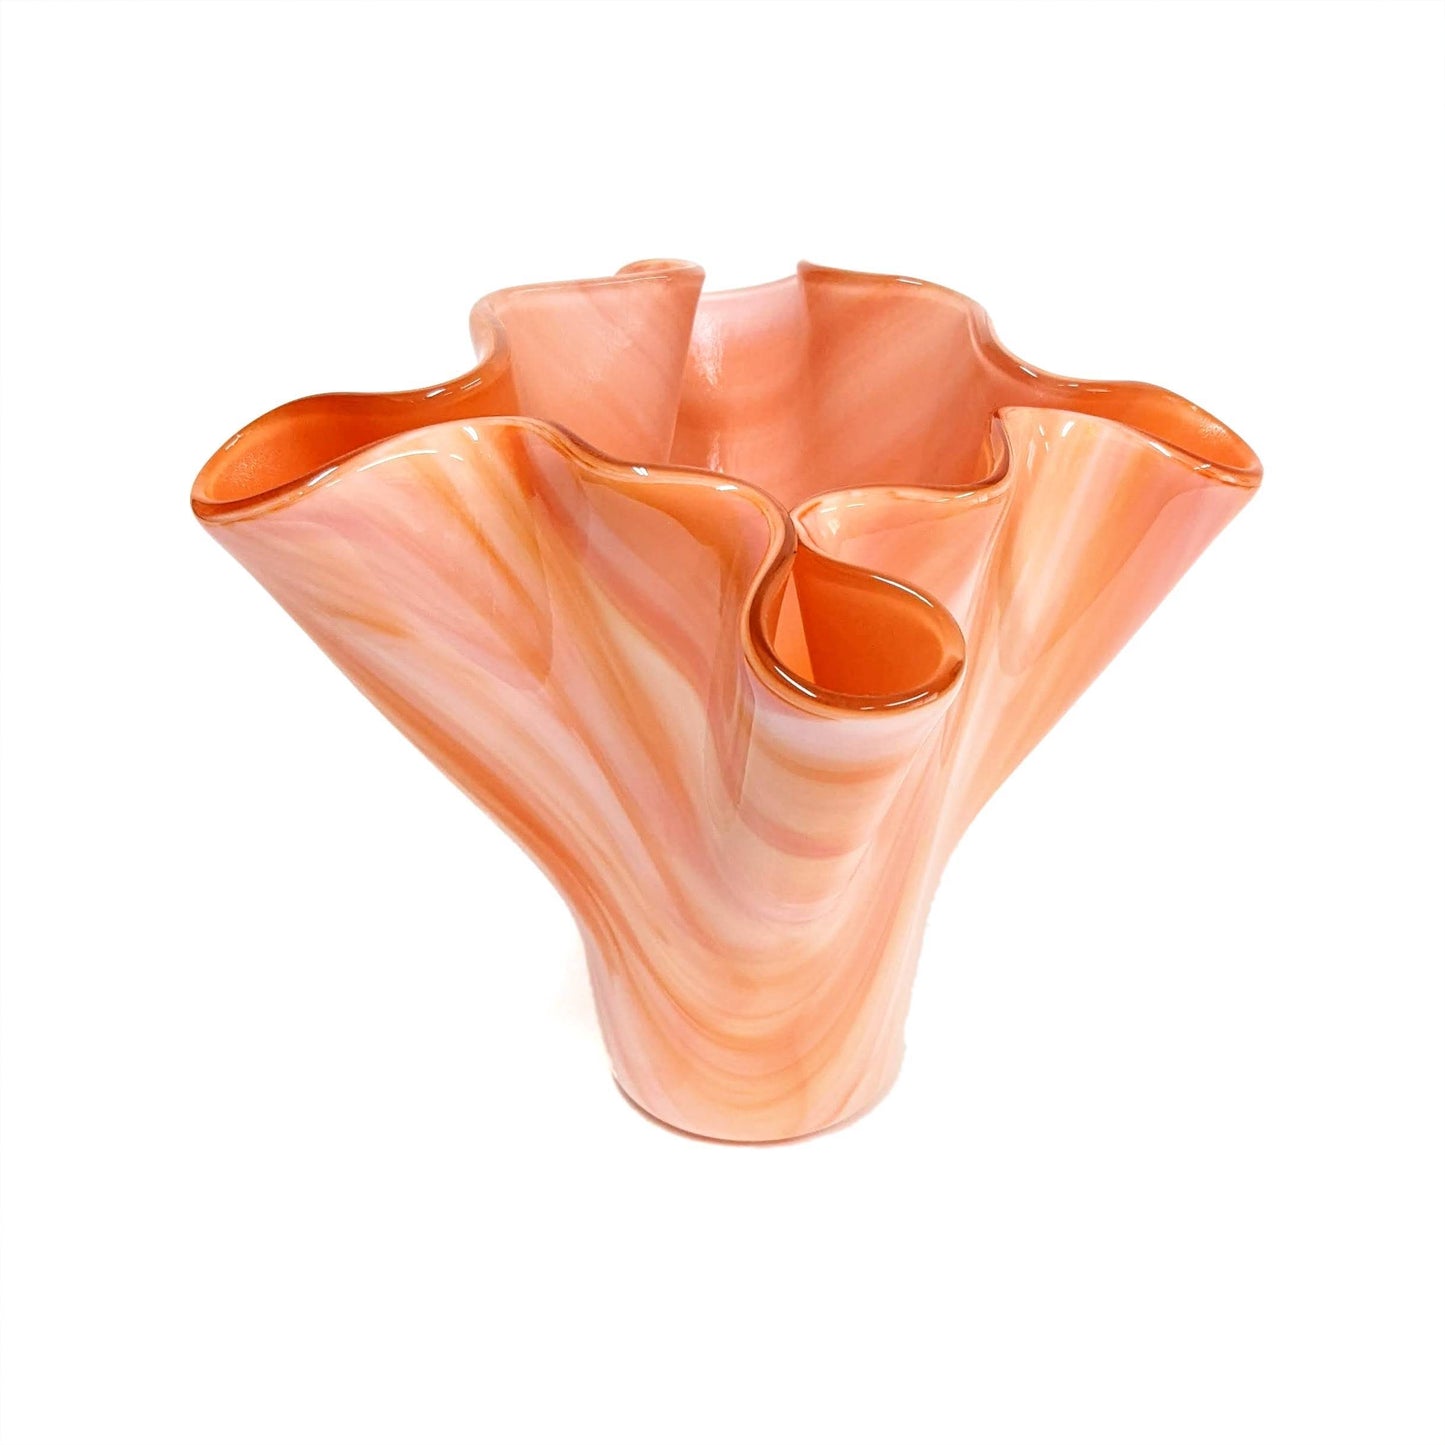 Glass Art Abstract Vase in Sunrise Orange Peach and White